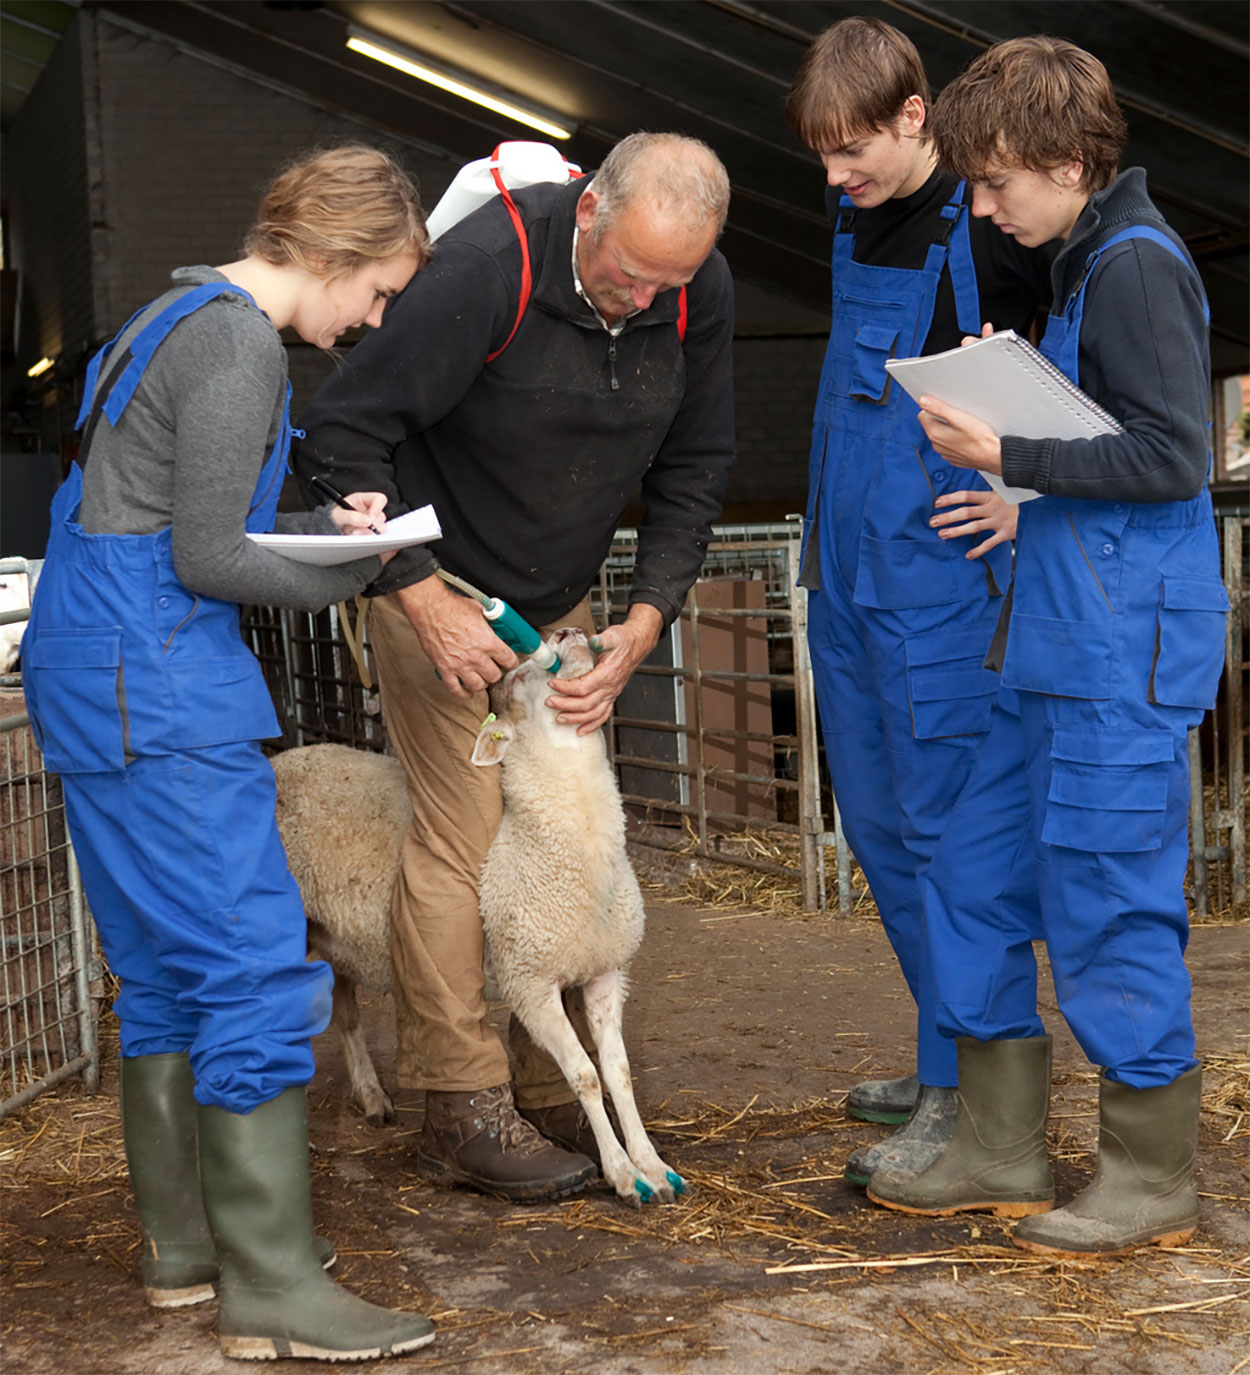 Three young trainees shadowing a veterinarian administering a deworming agent in a sheep.